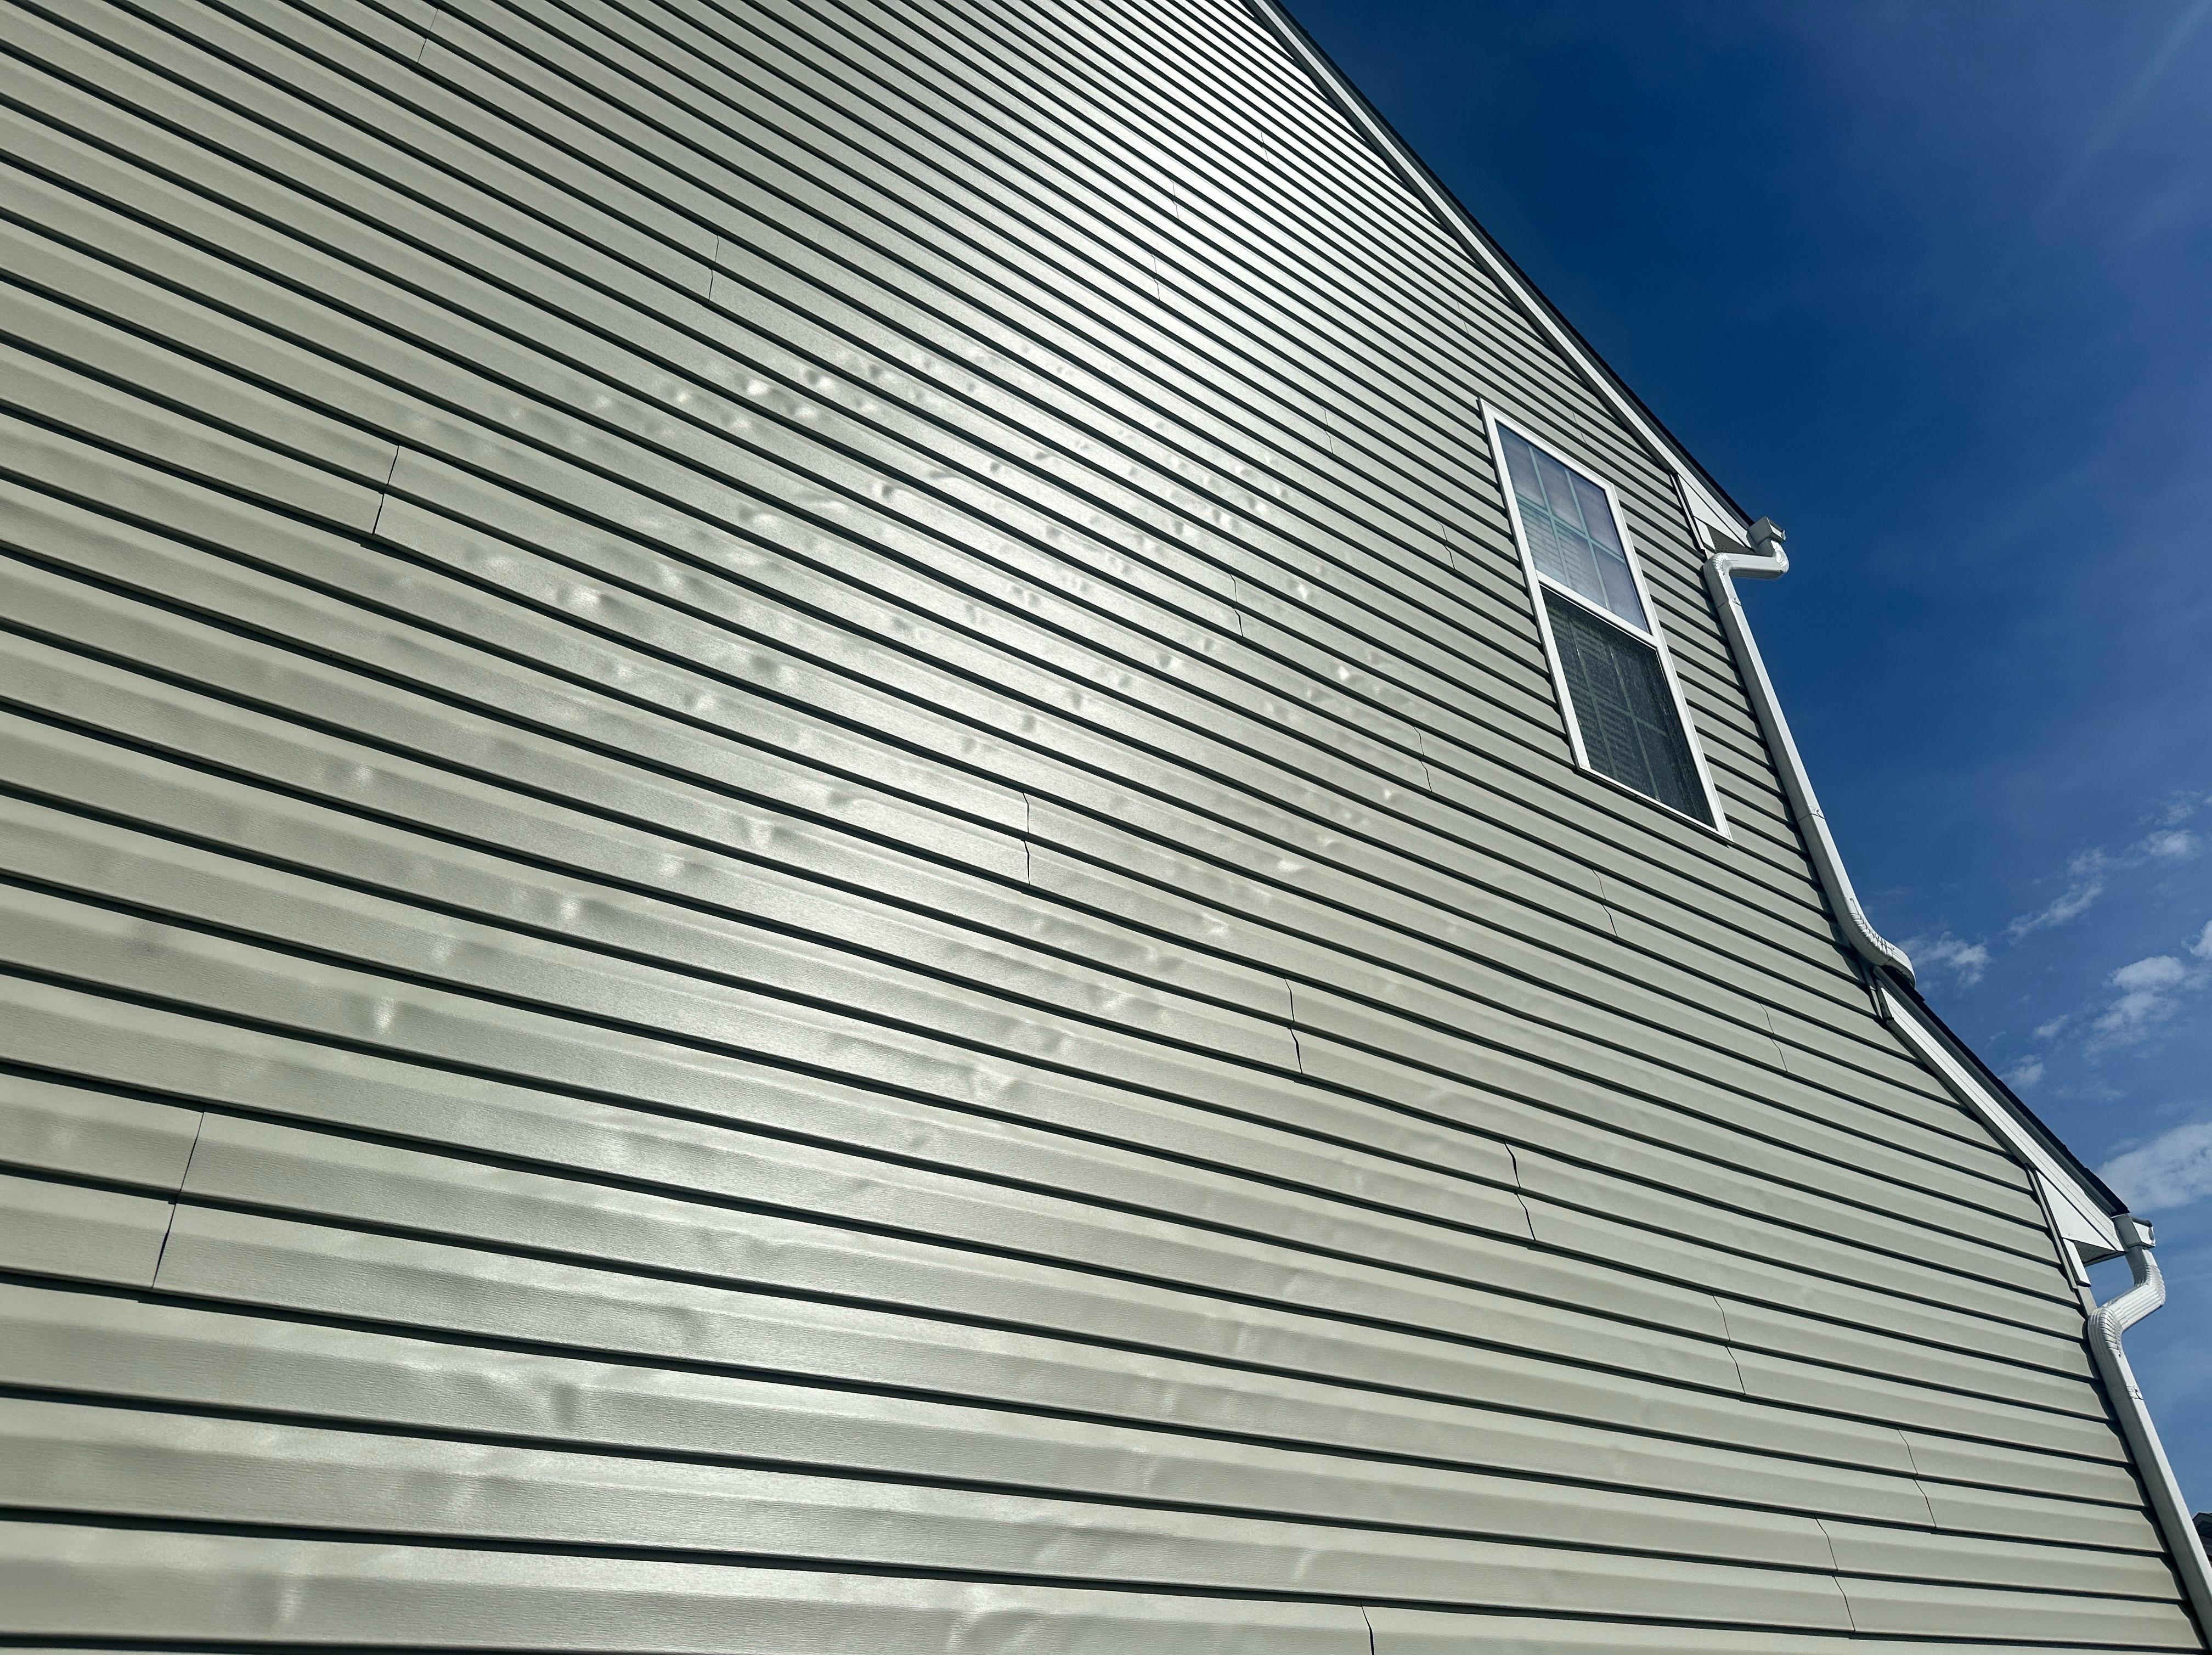 Thermal distortion to the siding